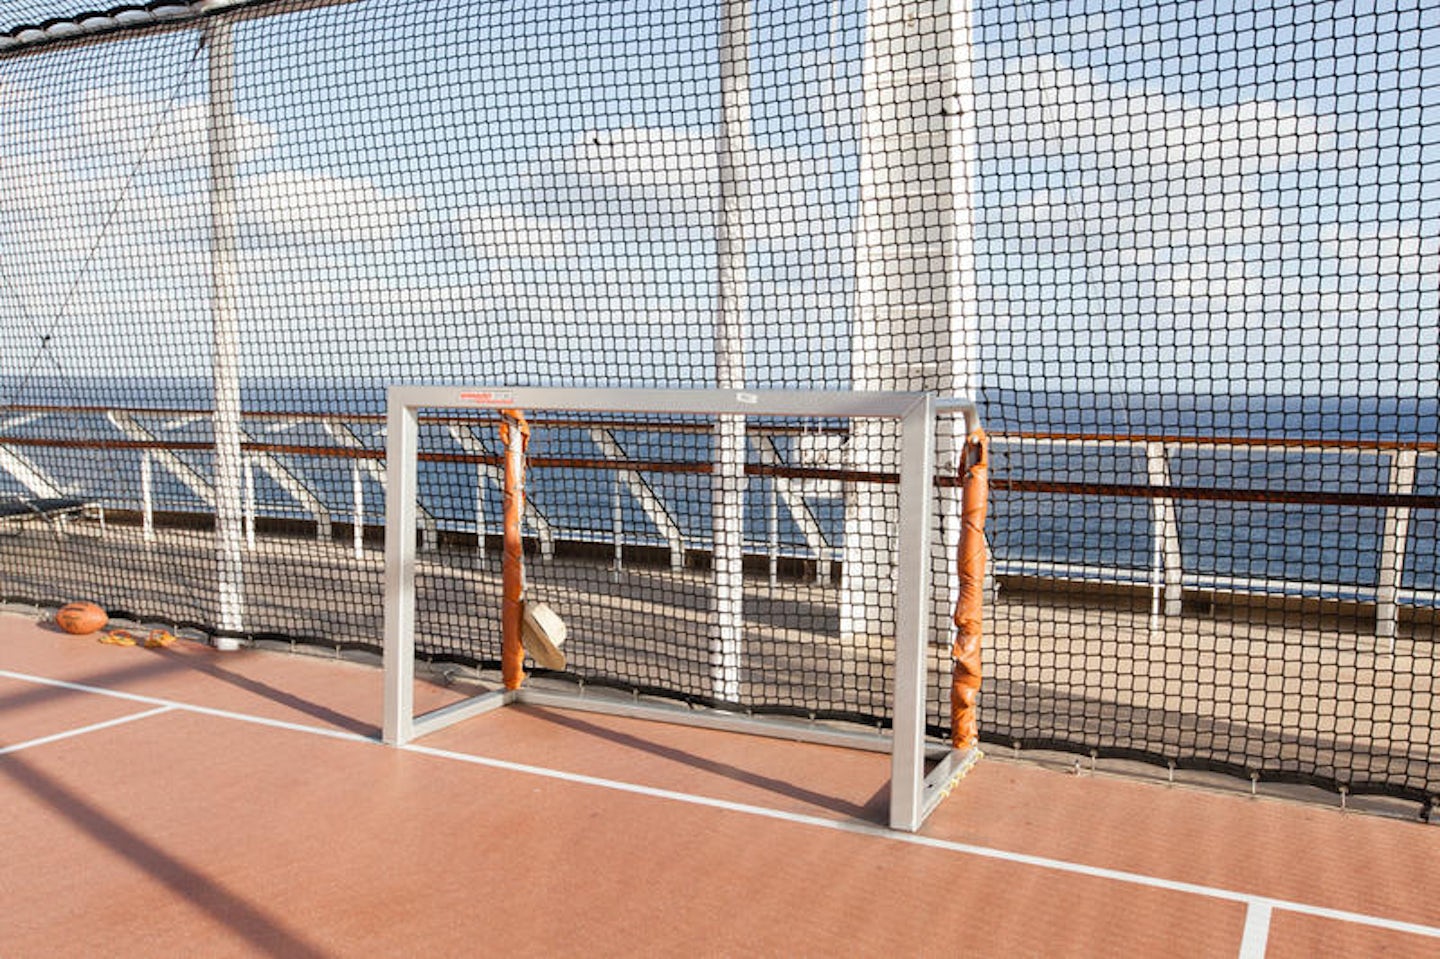 Basketball Court on Celebrity Silhouette